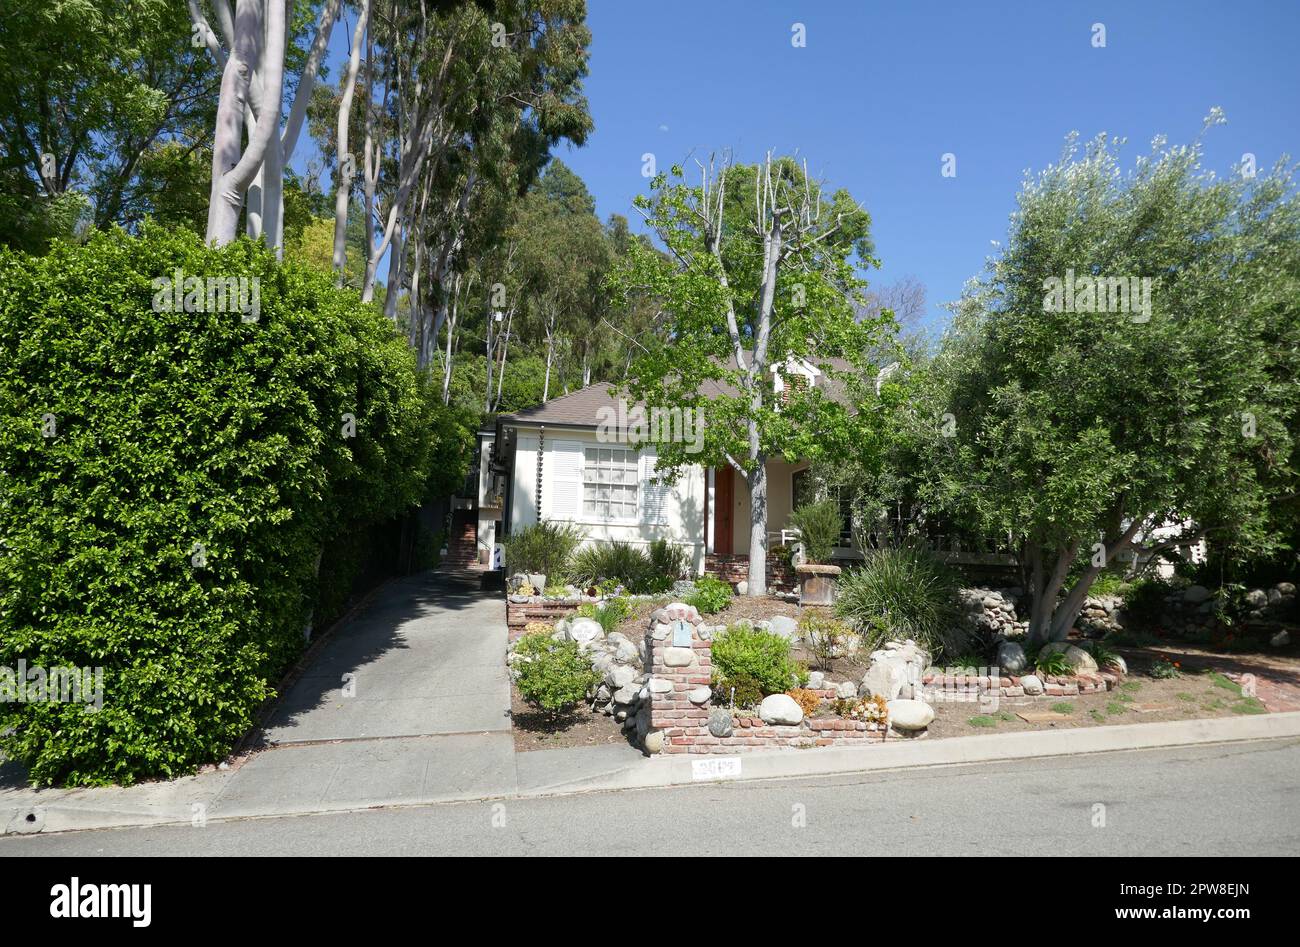 Los Angeles, California, USA 28th April 2023 Actor Brad Pitt and Entertainer Cassandra Peterson, aka Elvira Former home/house  in The Oaks on April 28, 2023 in Los Angeles, California, USA. Photo by Barry King/Alamy Stock Photo Stock Photo